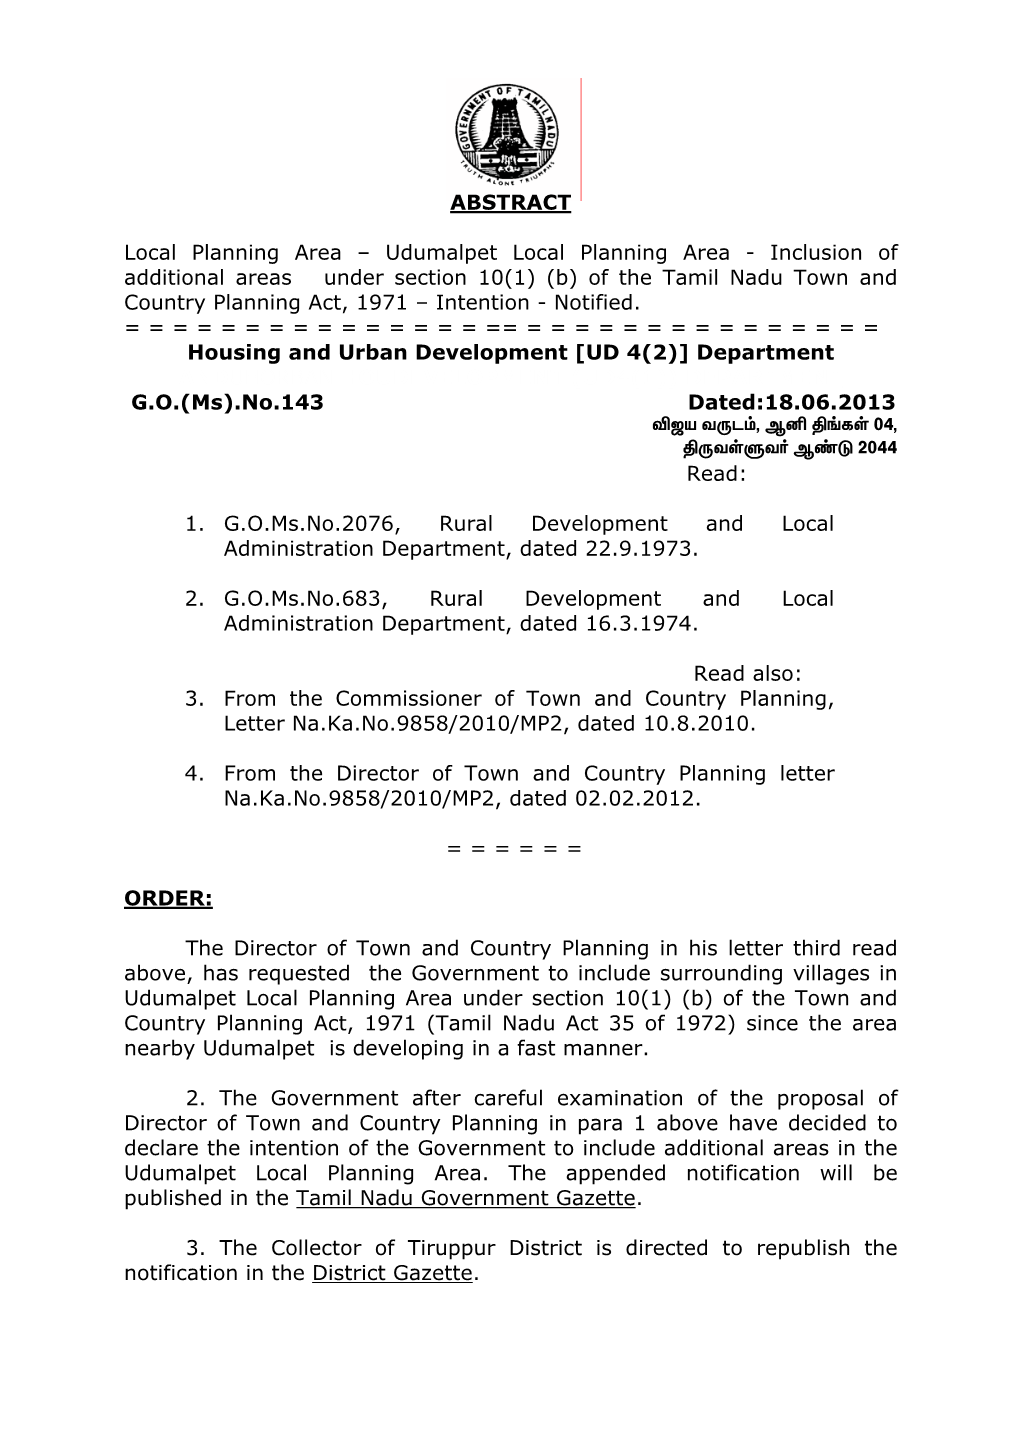 Udumalpet Local Planning Area - Inclusion of Additional Areas Under Section 10(1) (B) of the Tamil Nadu Town and Country Planning Act, 1971 – Intention - Notified